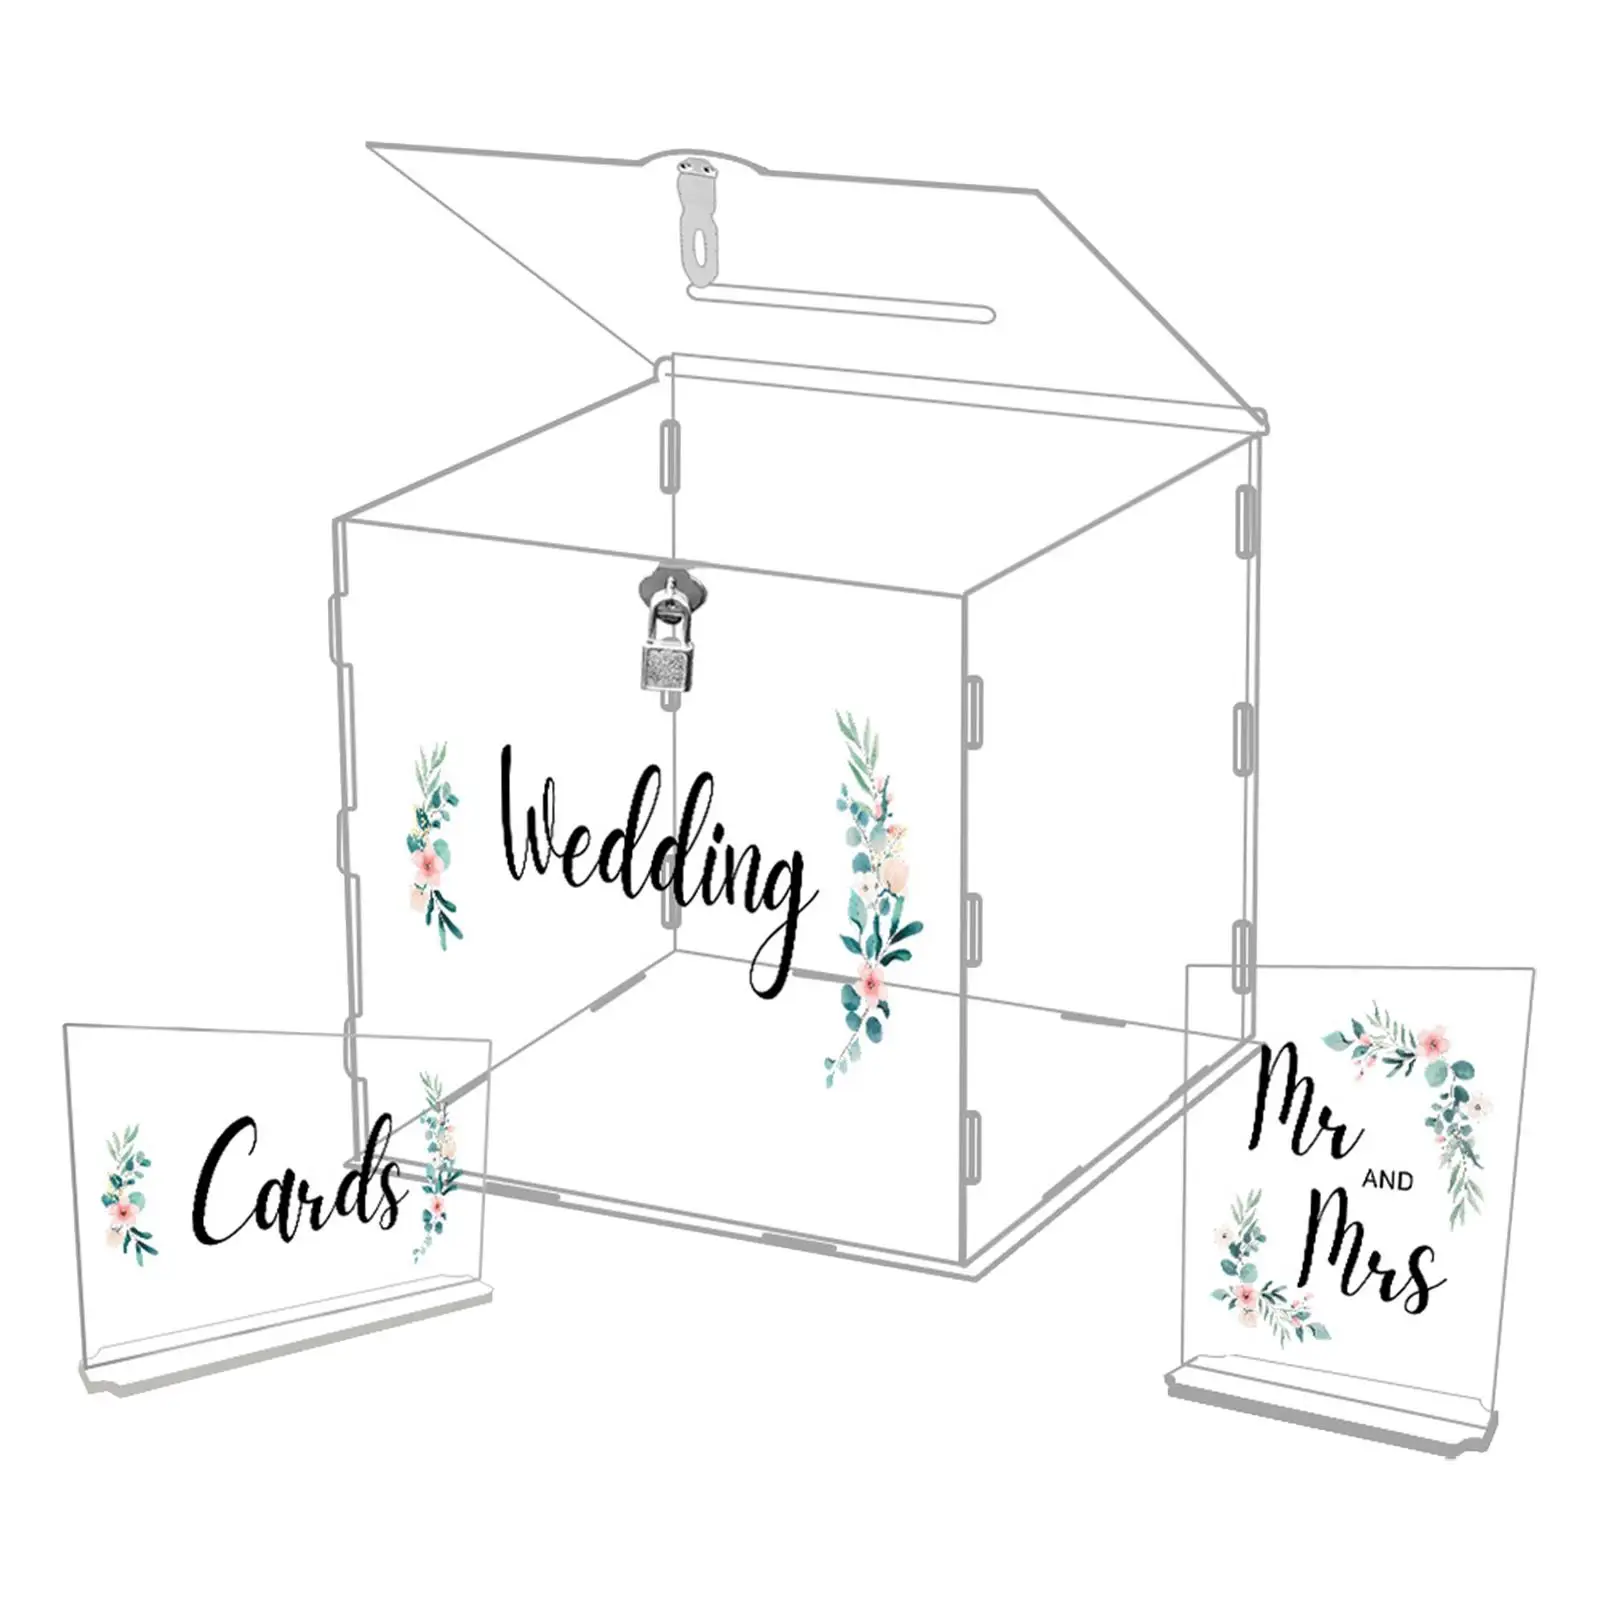 Acrylic wedding cards Box Elegant Storage Box Clear Guest Gift Card Box Decorative Letter Envelope Box for Anniversary Birthday